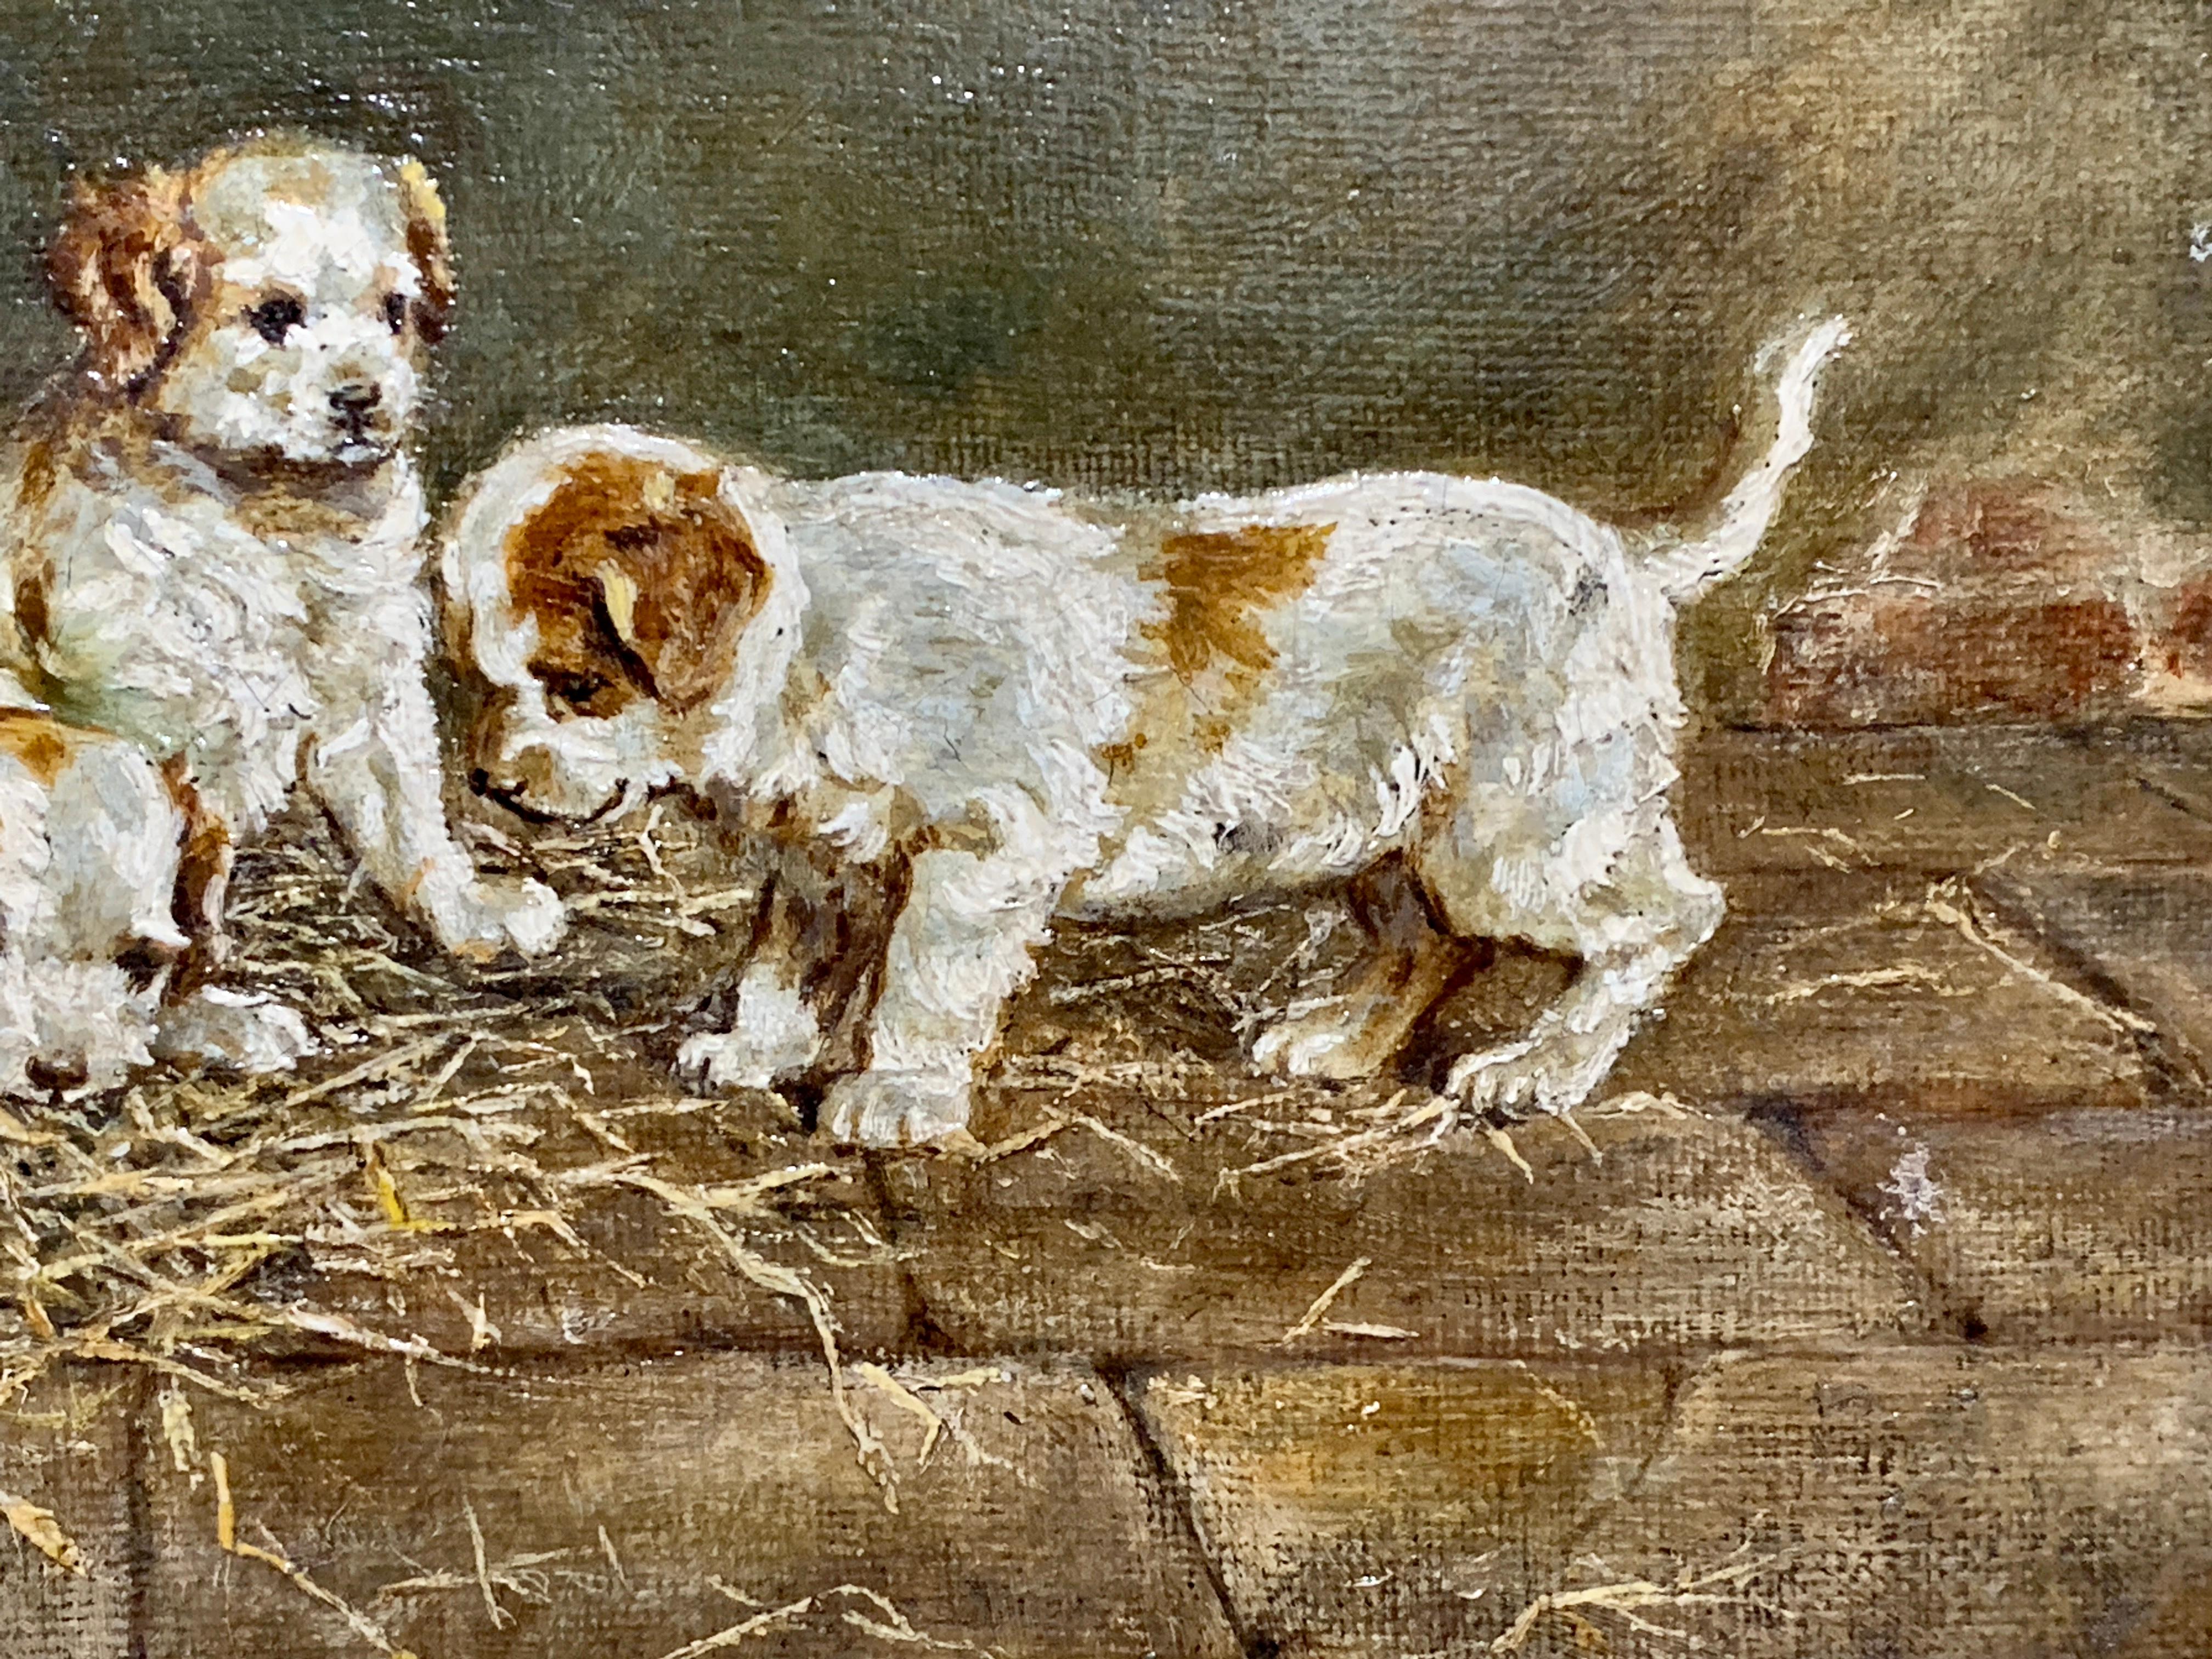 Wonderful late 19th century English oil on canvas of three Jack Russel puppies playing in a barn interior.

Signed and dated 1889 this is typical of the late Victorian animal paintings that were so popular at the end of the 19th century.

The artist